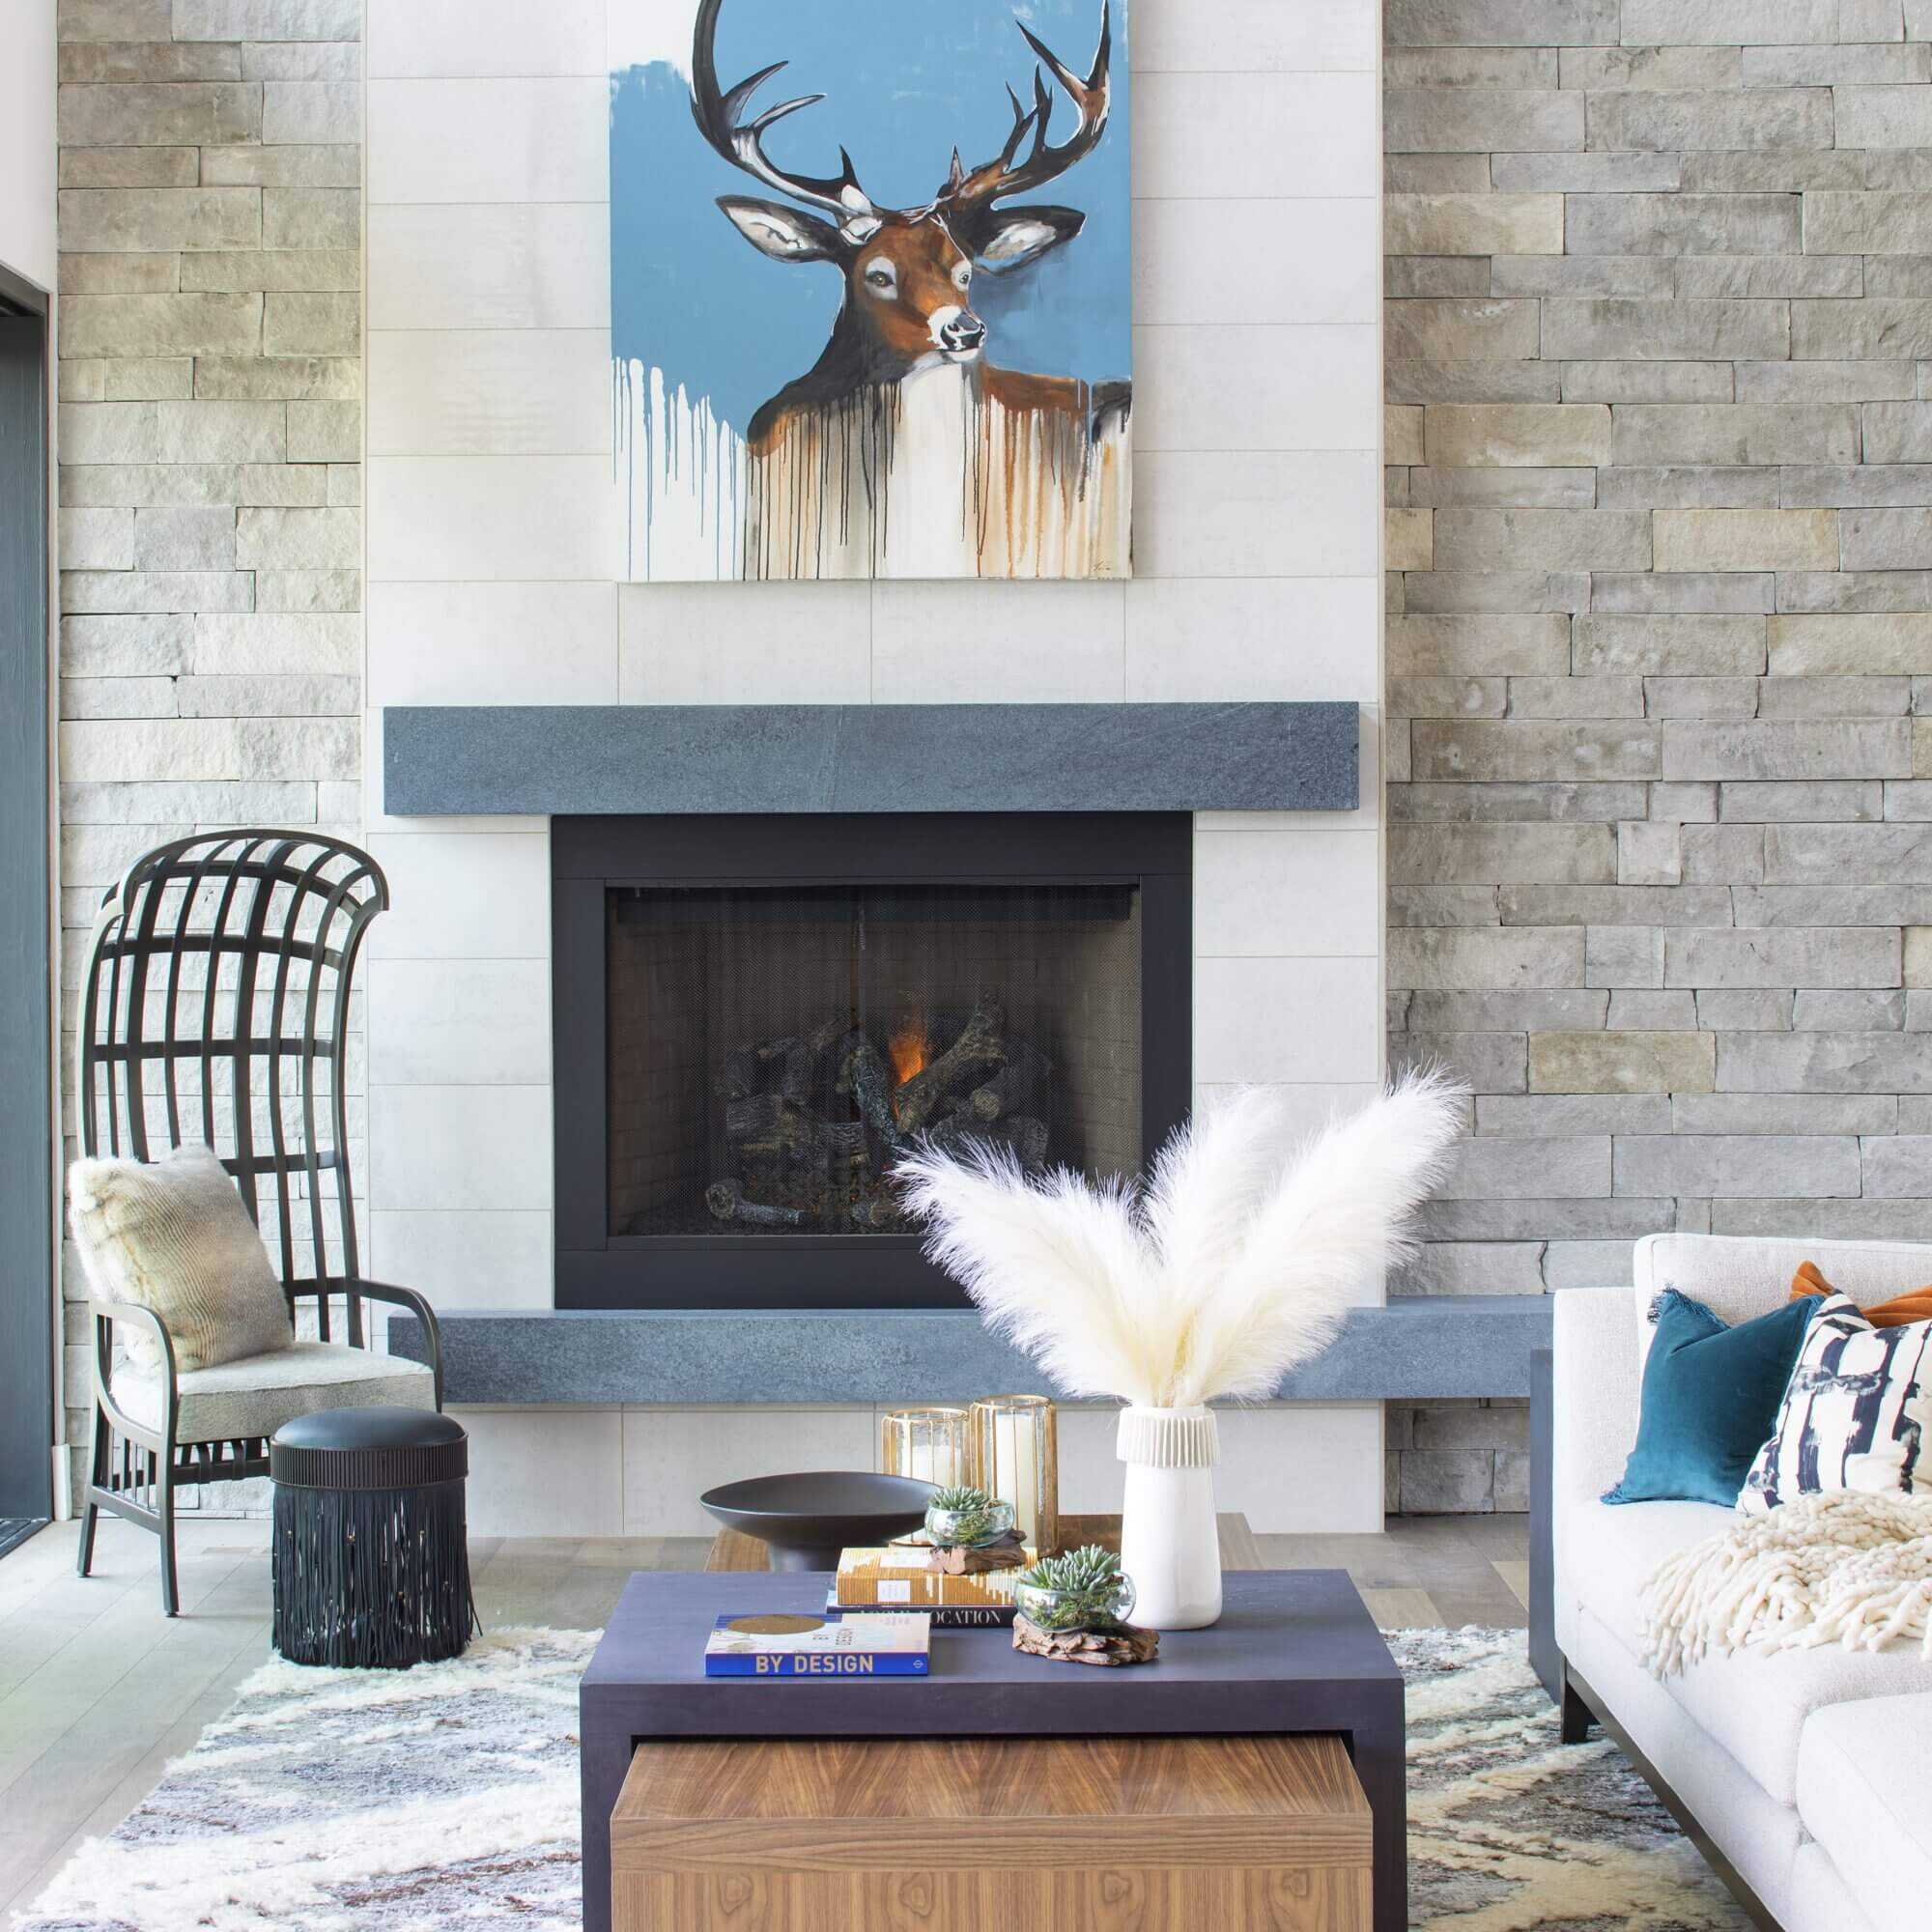 A living room with a fireplace and a deer on the wall.